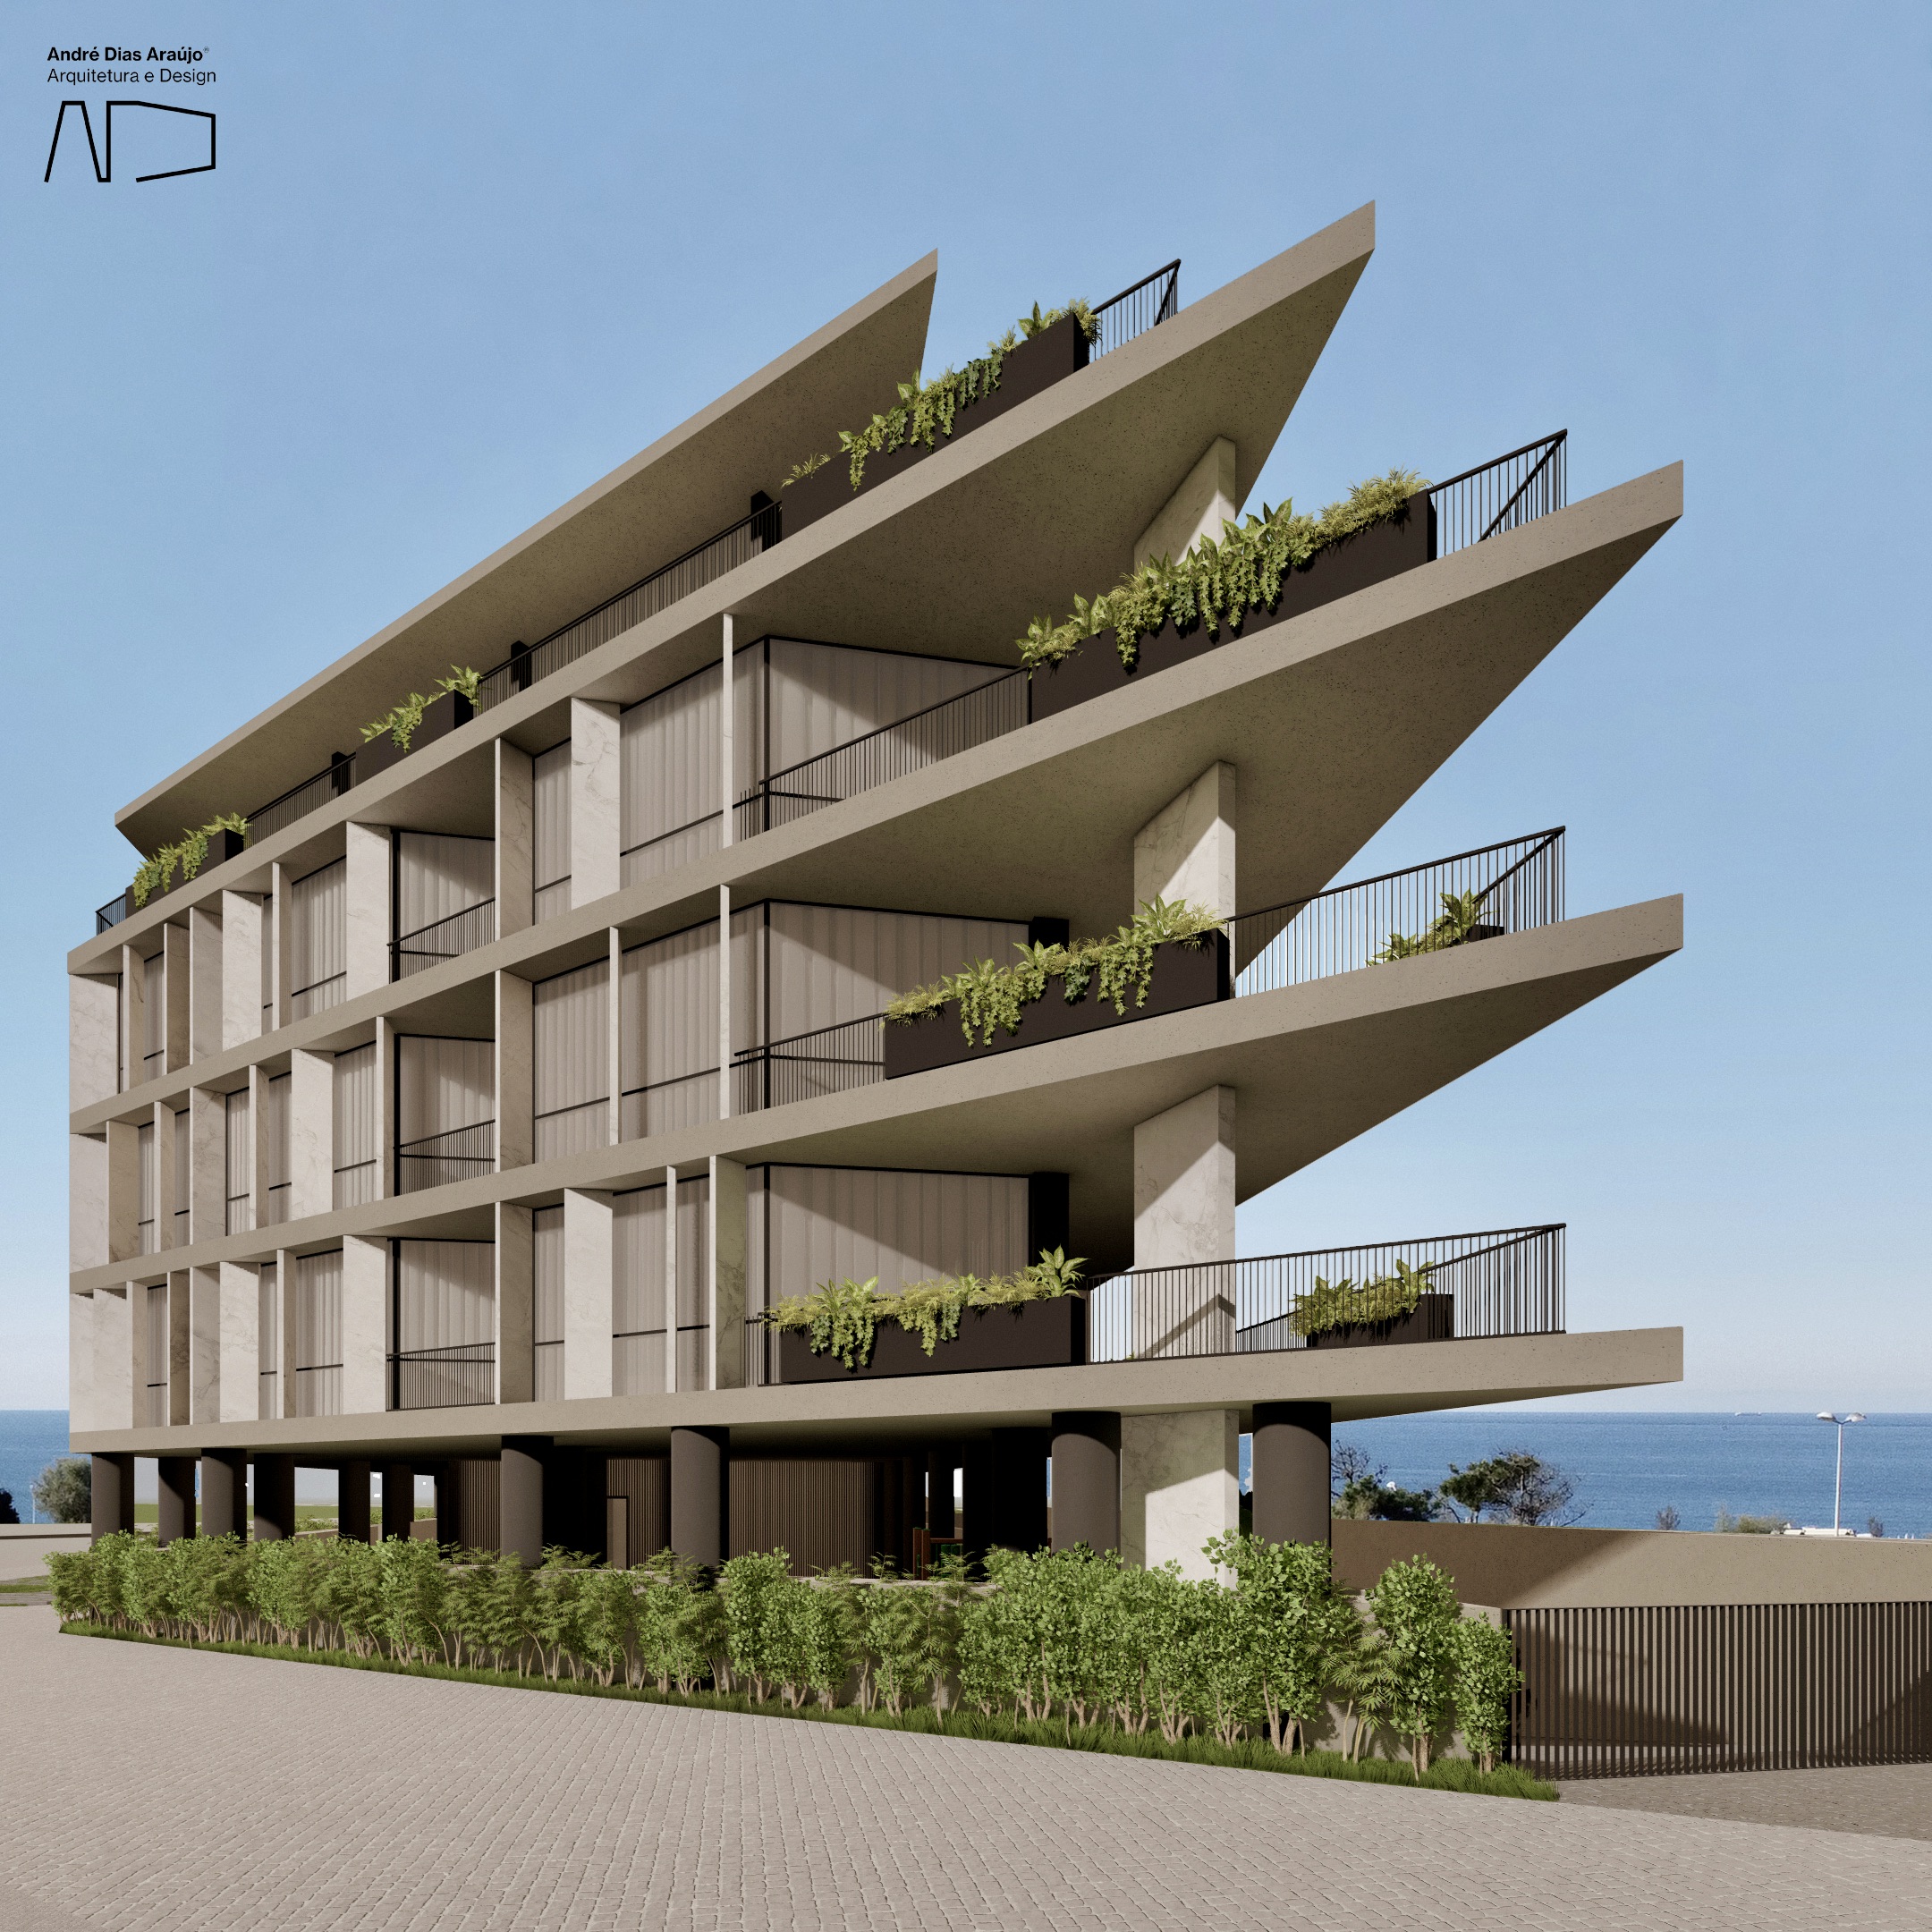 Living Sea | Luxury Apartments | Canidelo, VN Gaia